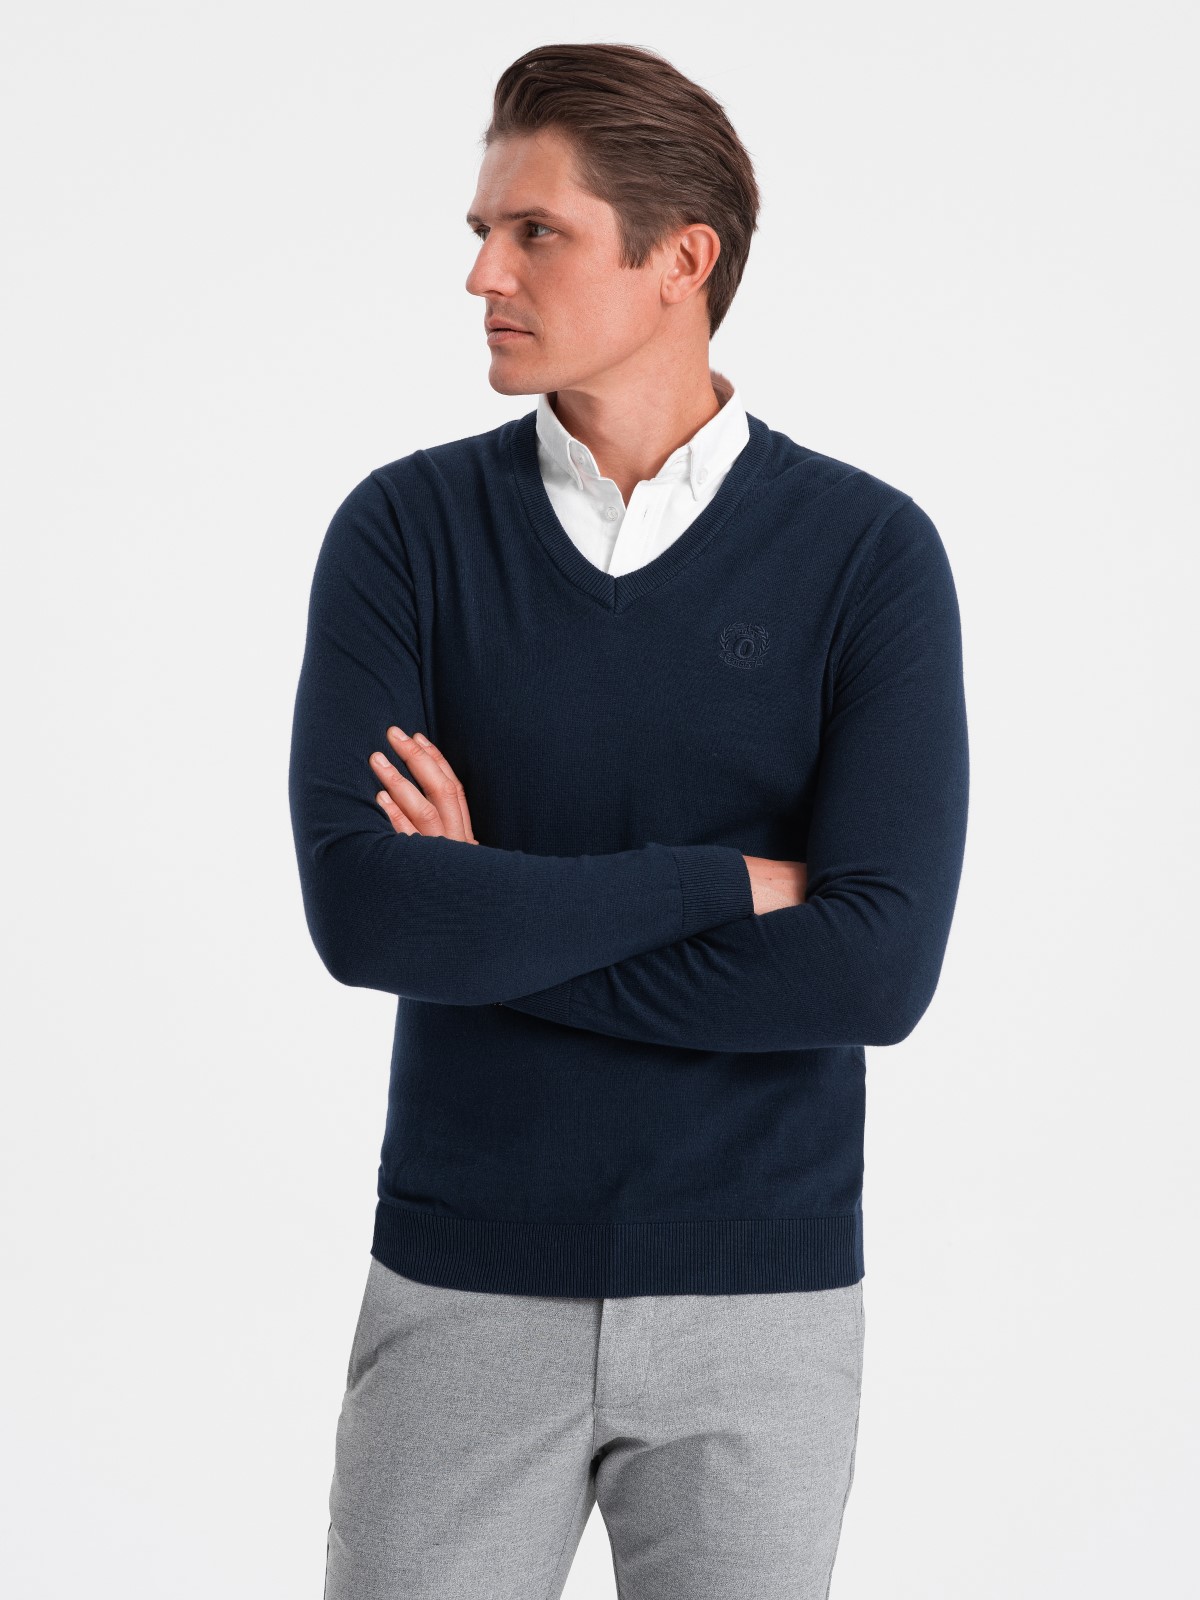 Ombre Men's sweater with a "v-neck" neckline with a shirt collar - navy blue